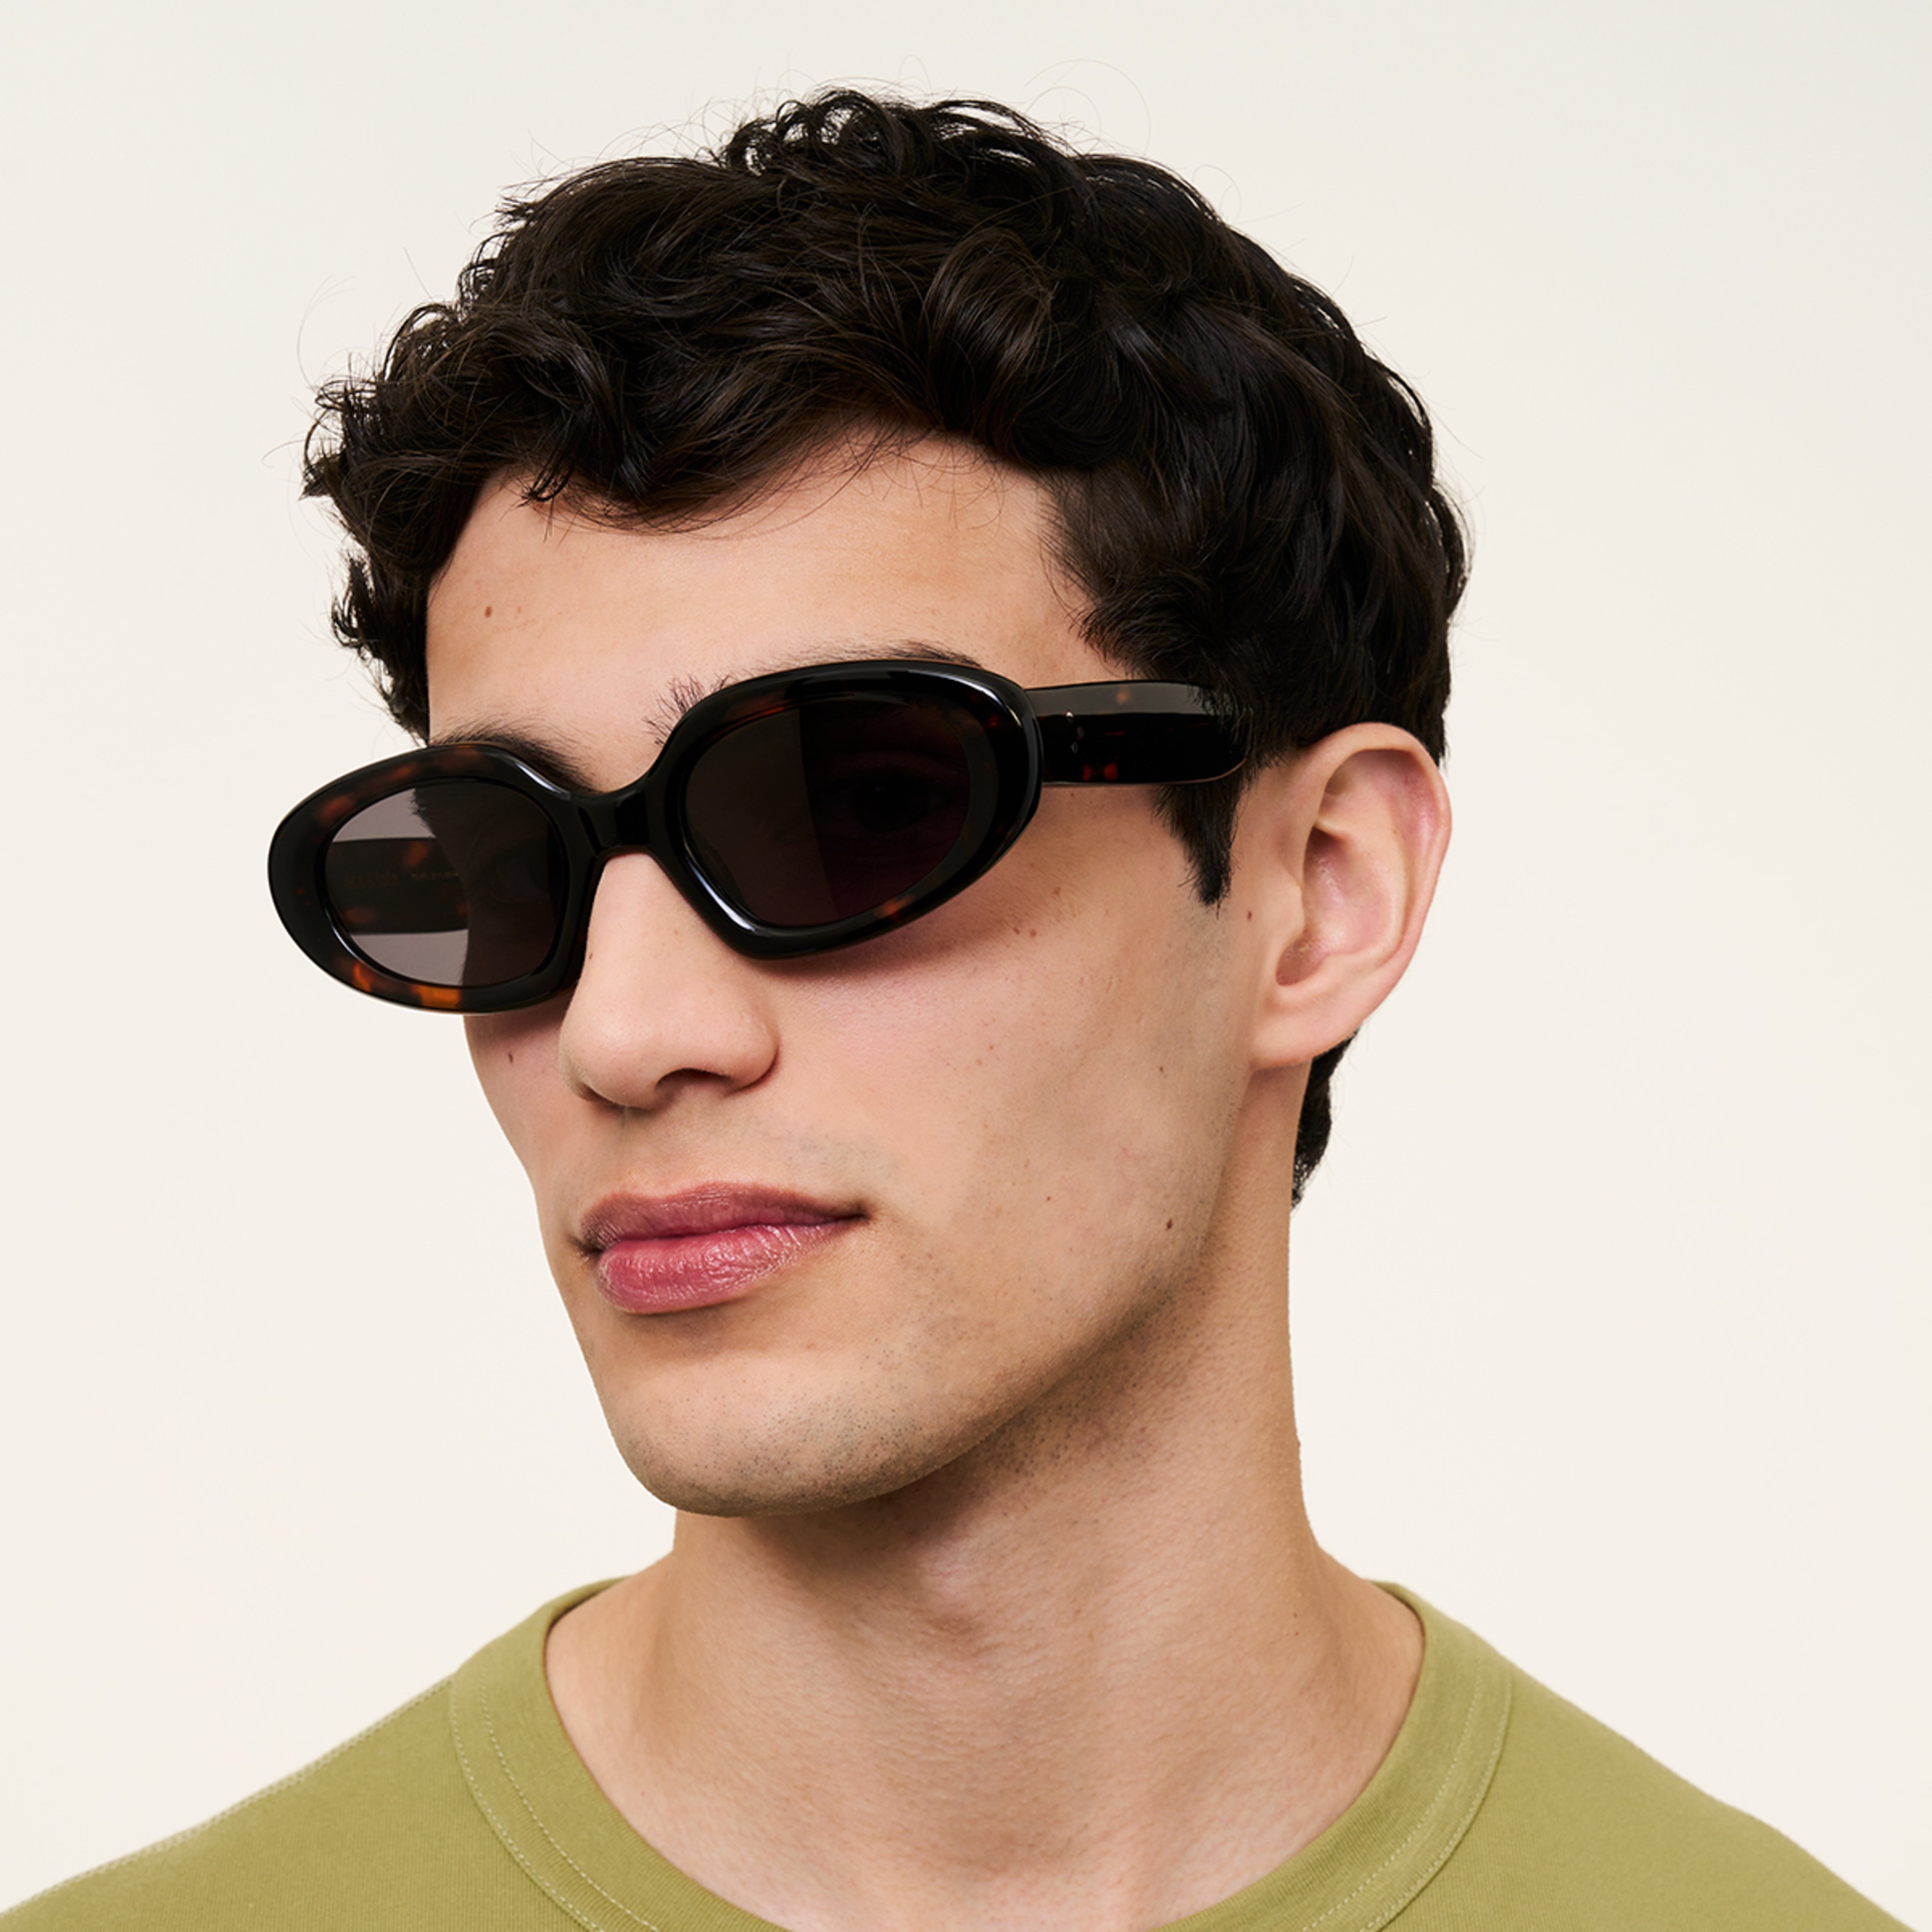 Ace & Tate Solaires | oval Renew bio-acétate in Marron